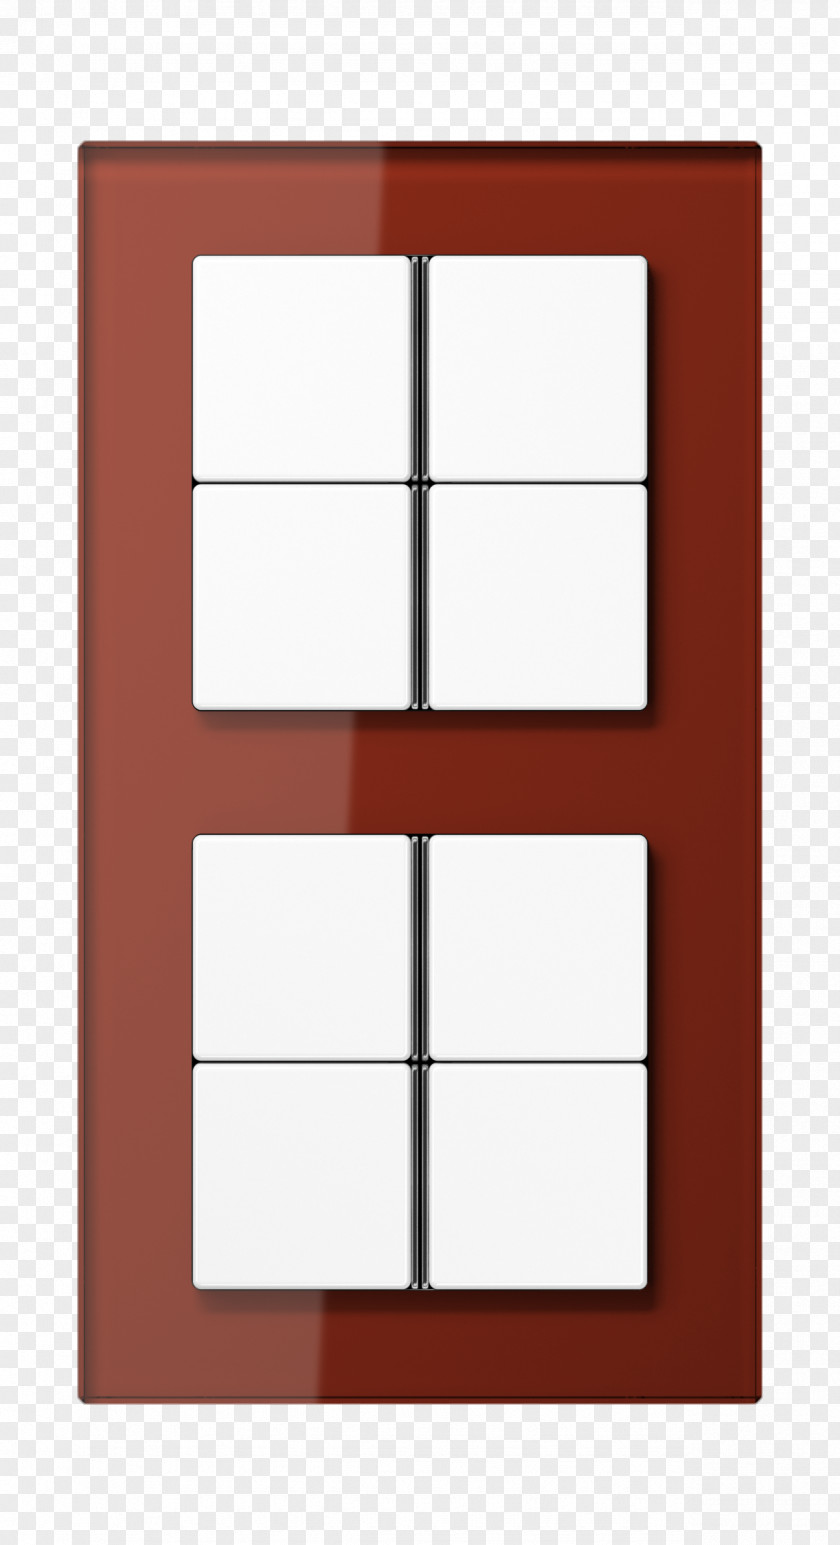 Button Design Window Glass Air Conditioning Picture Frames Pattern PNG